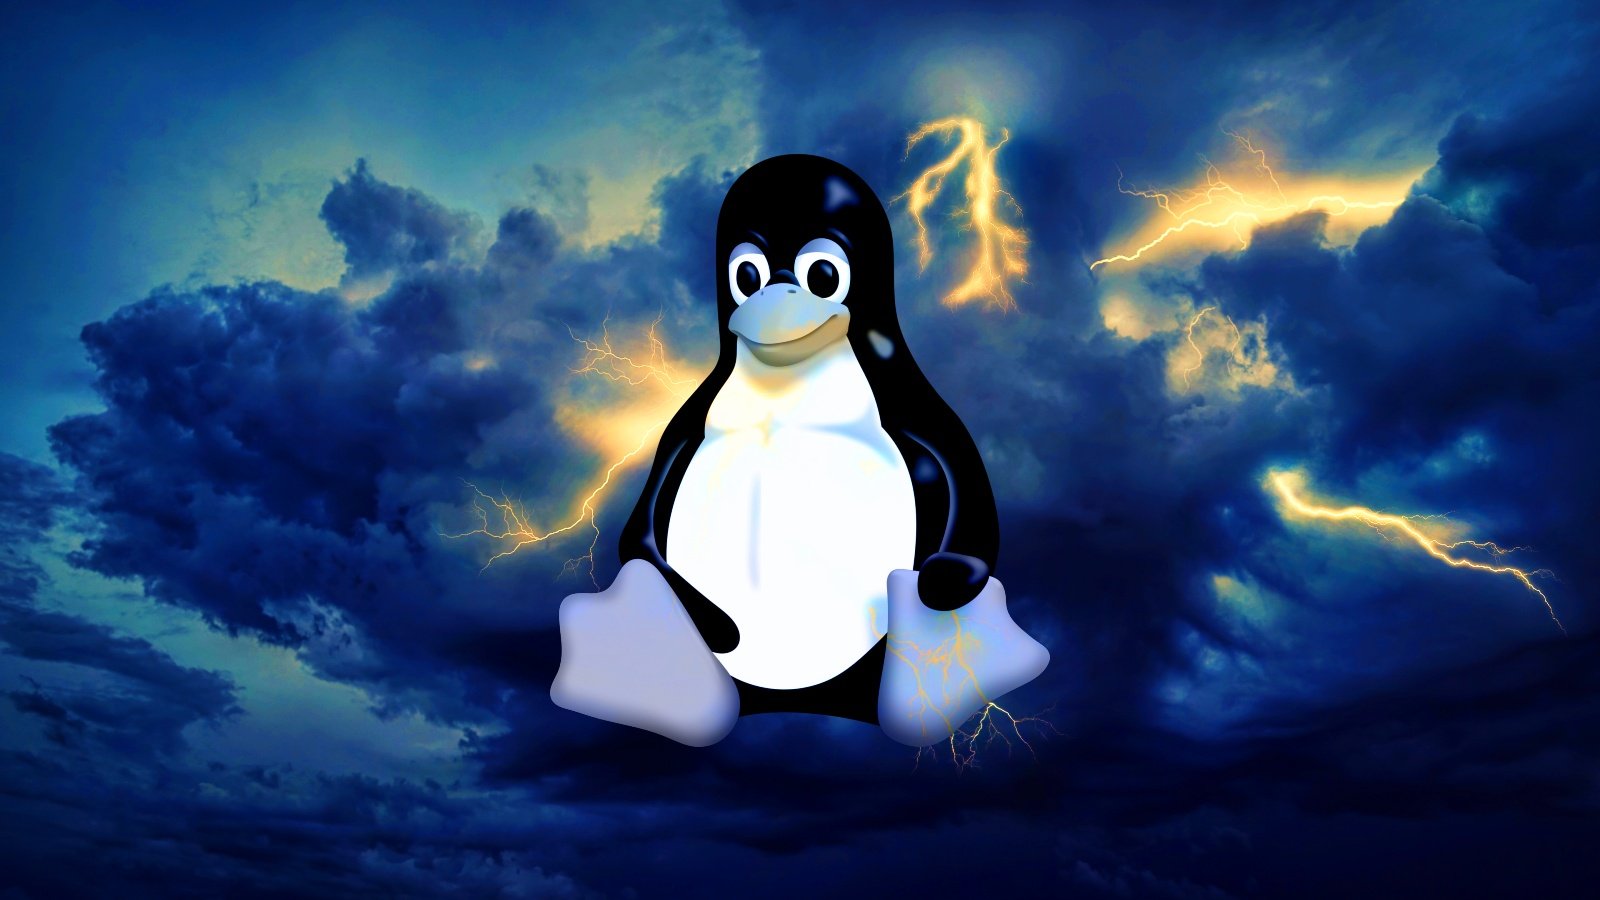 Linux Tux logo with lightning in the background